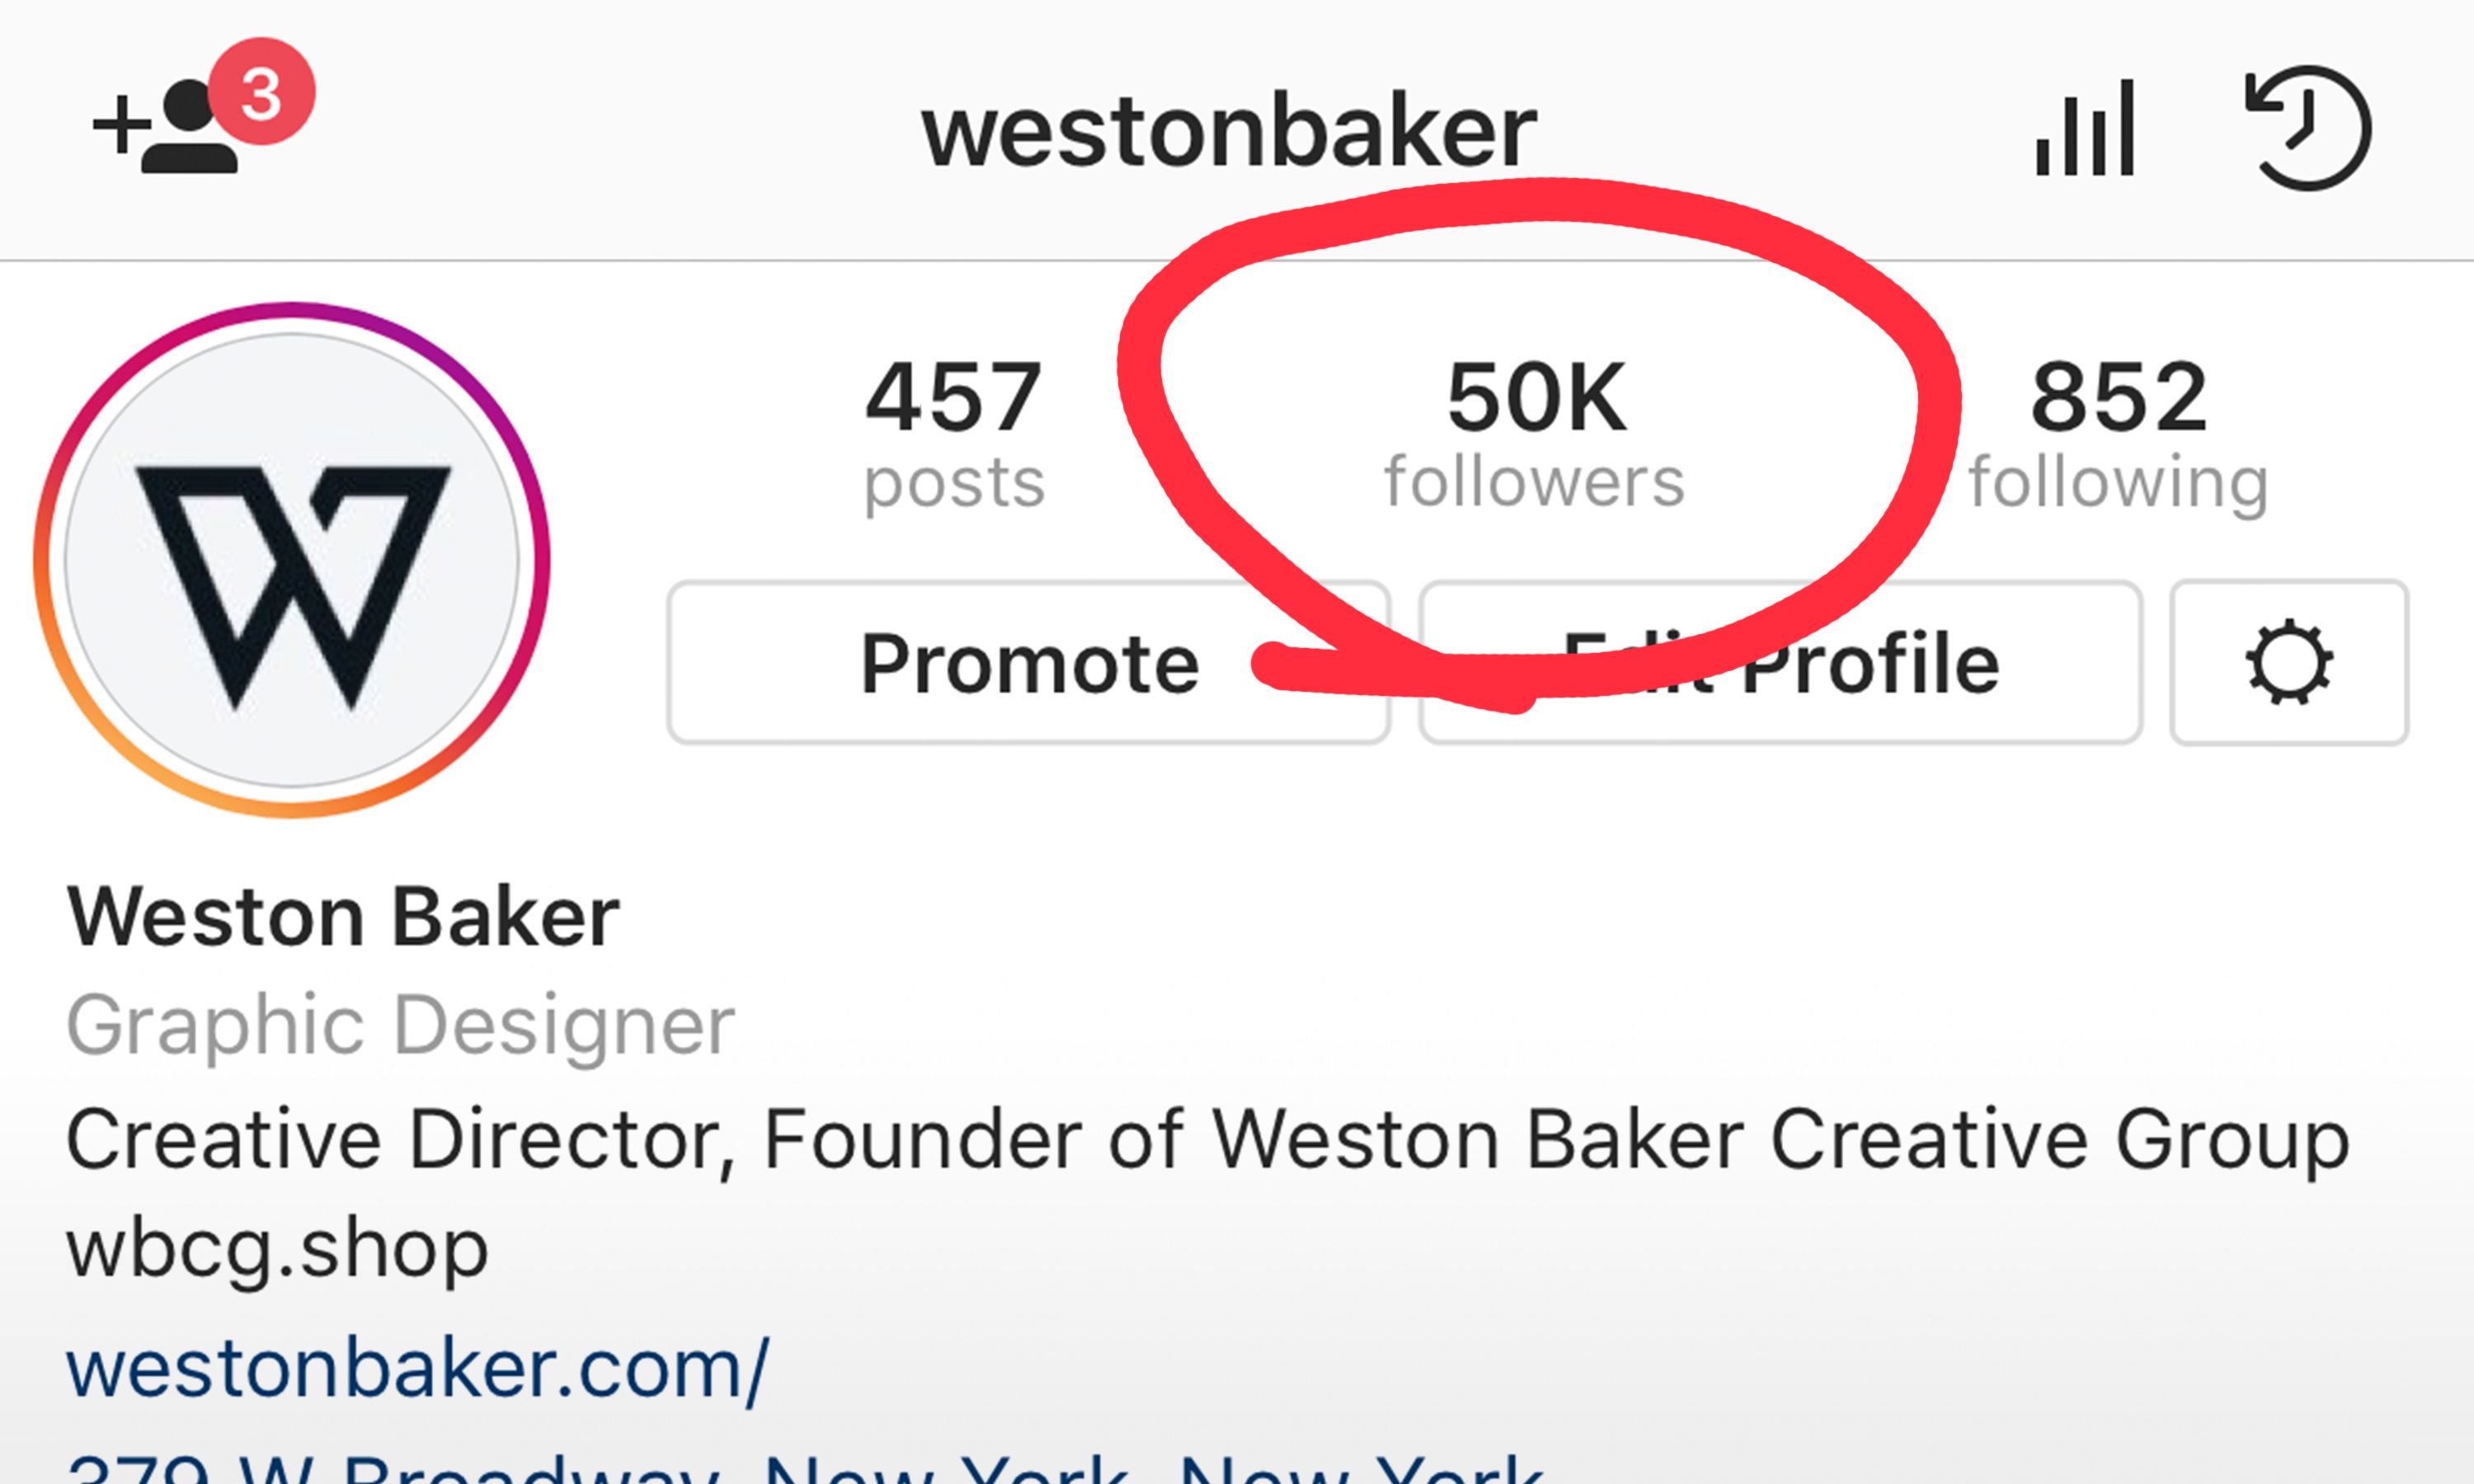 How much is an instagram account with 50k followers worth